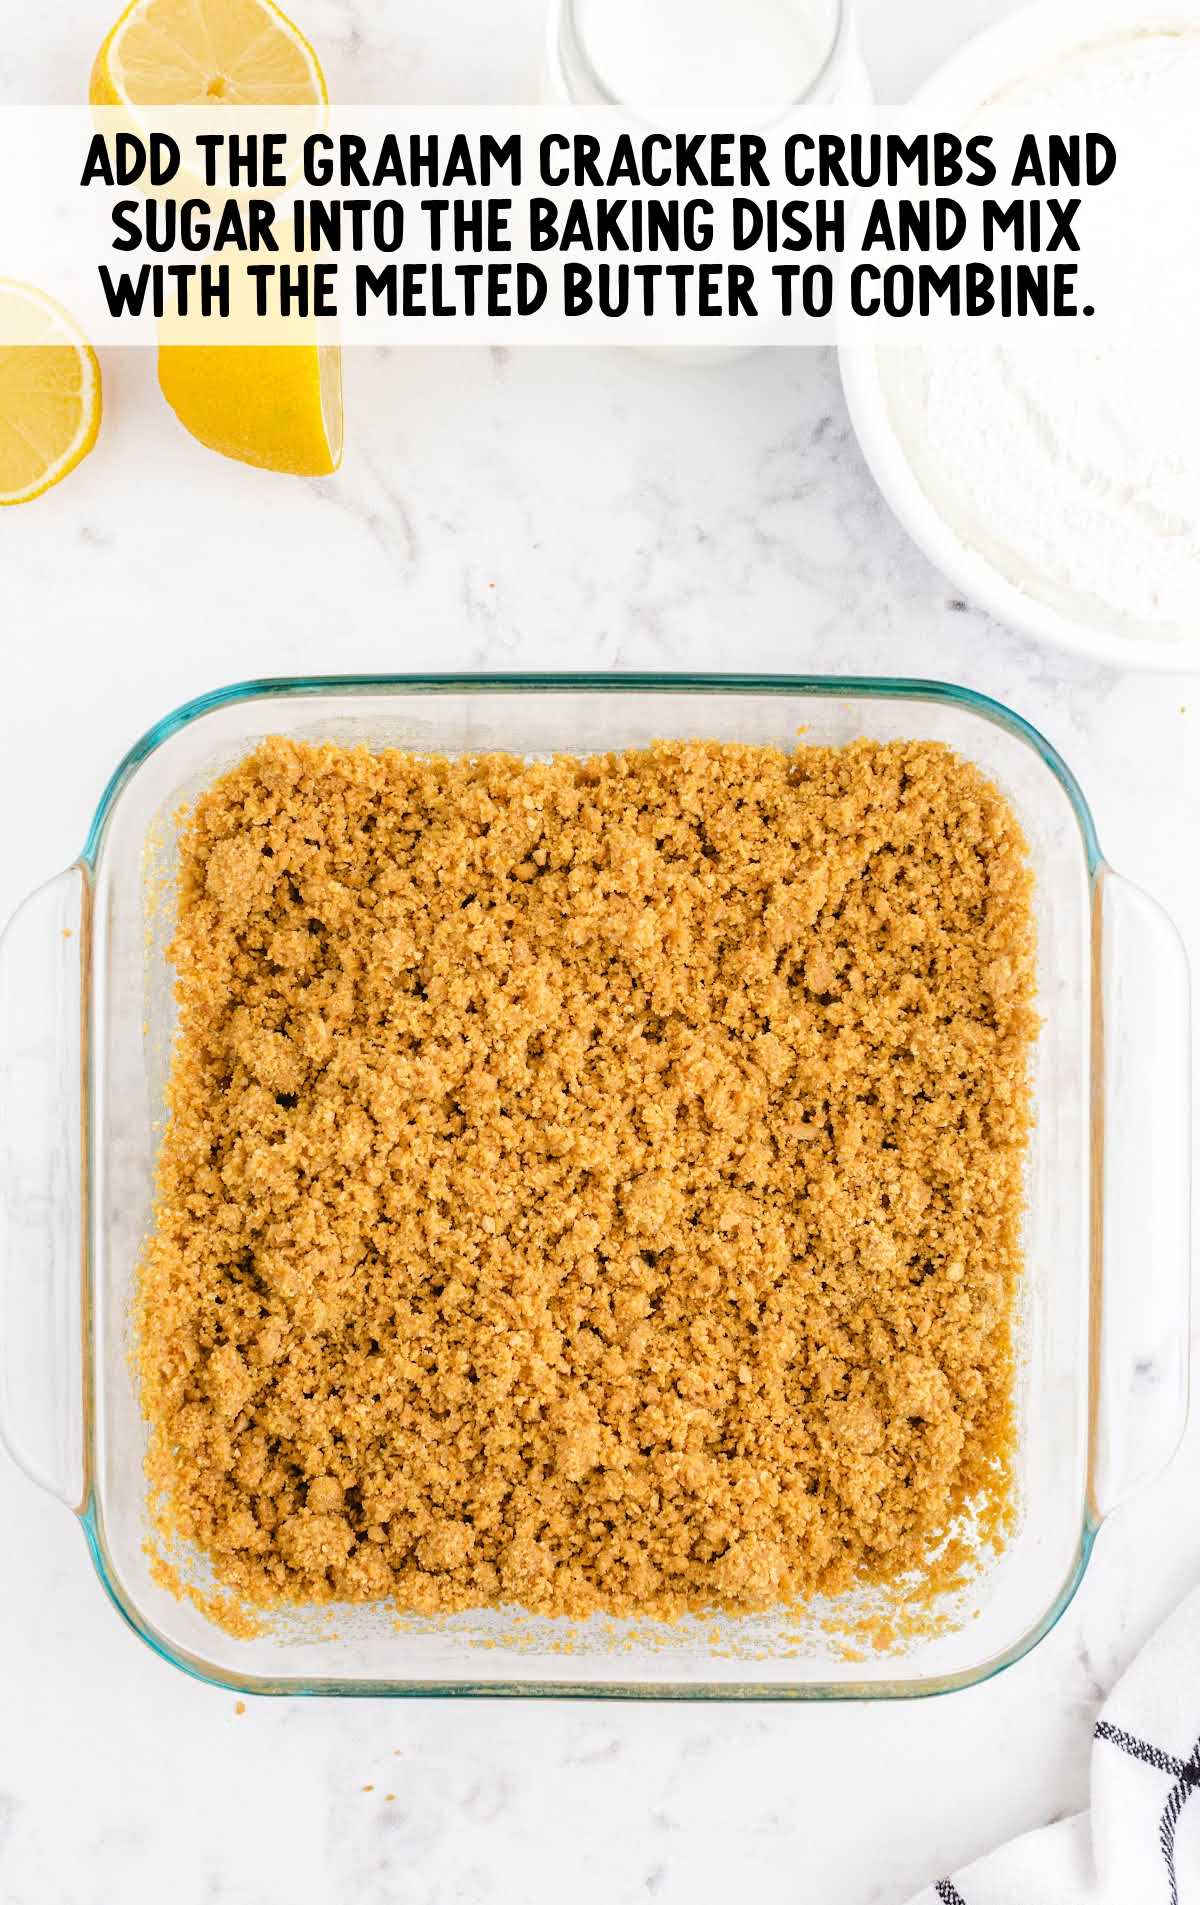 graham crackers crumbs and sugar added to the baking dish